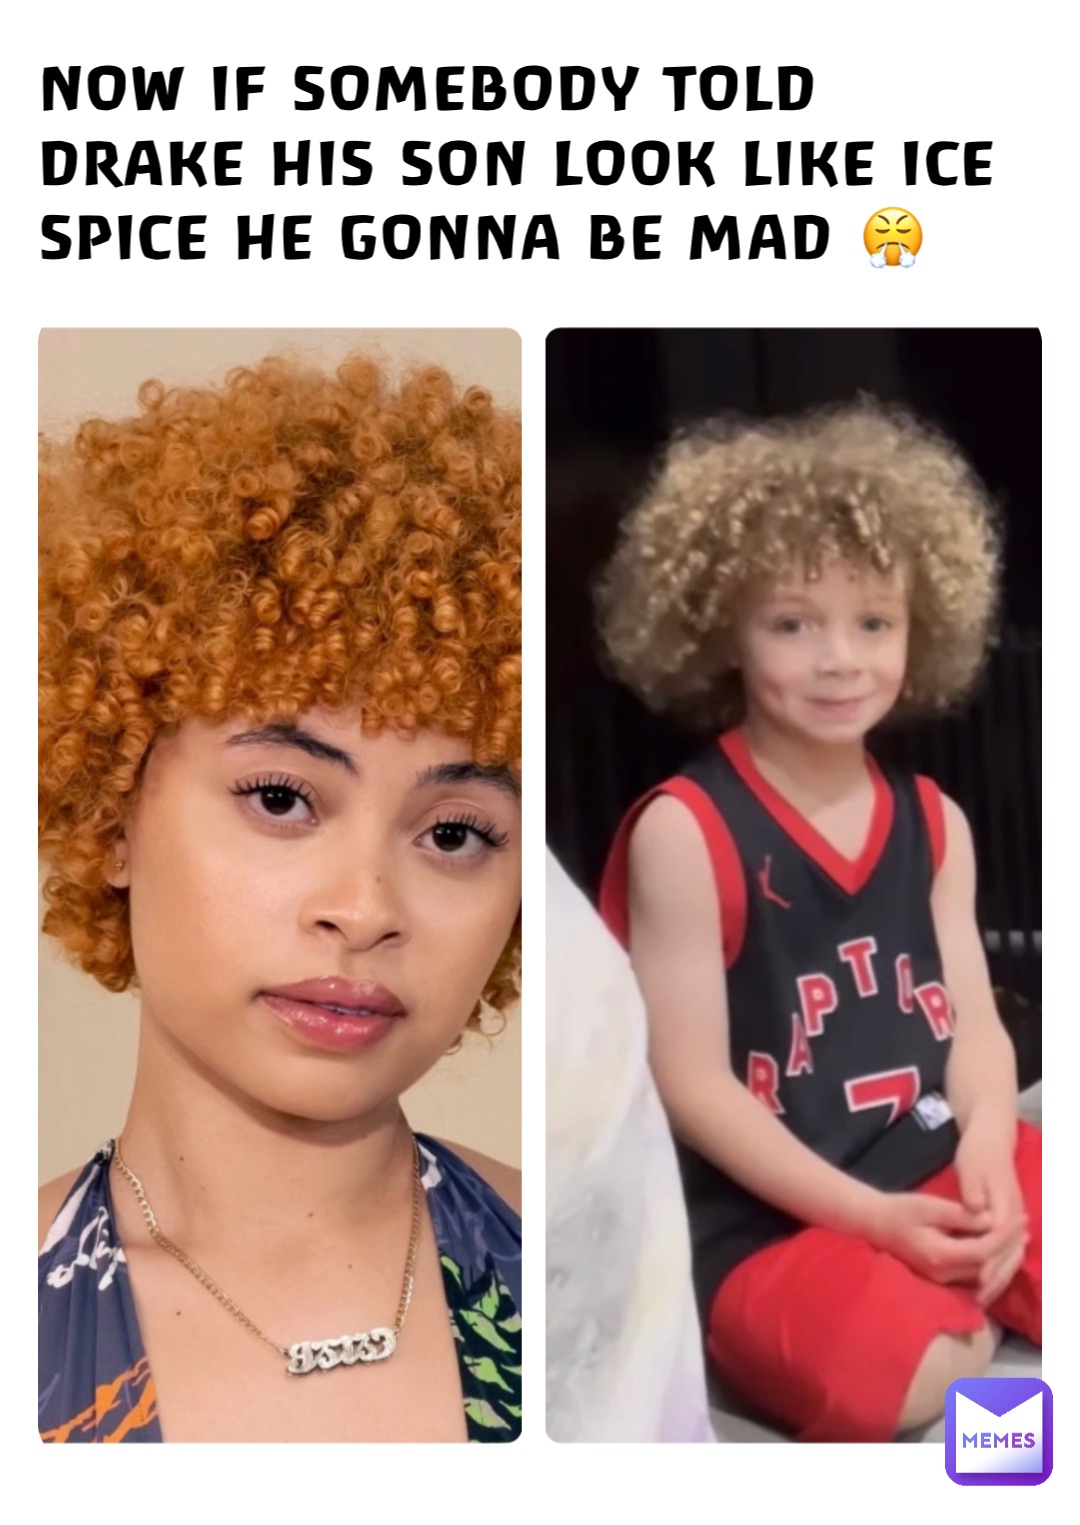 NOW IF SOMEBODY TOLD DRAKE HIS SON LOOK LIKE ICE SPICE HE GONNA BE MAD 😤